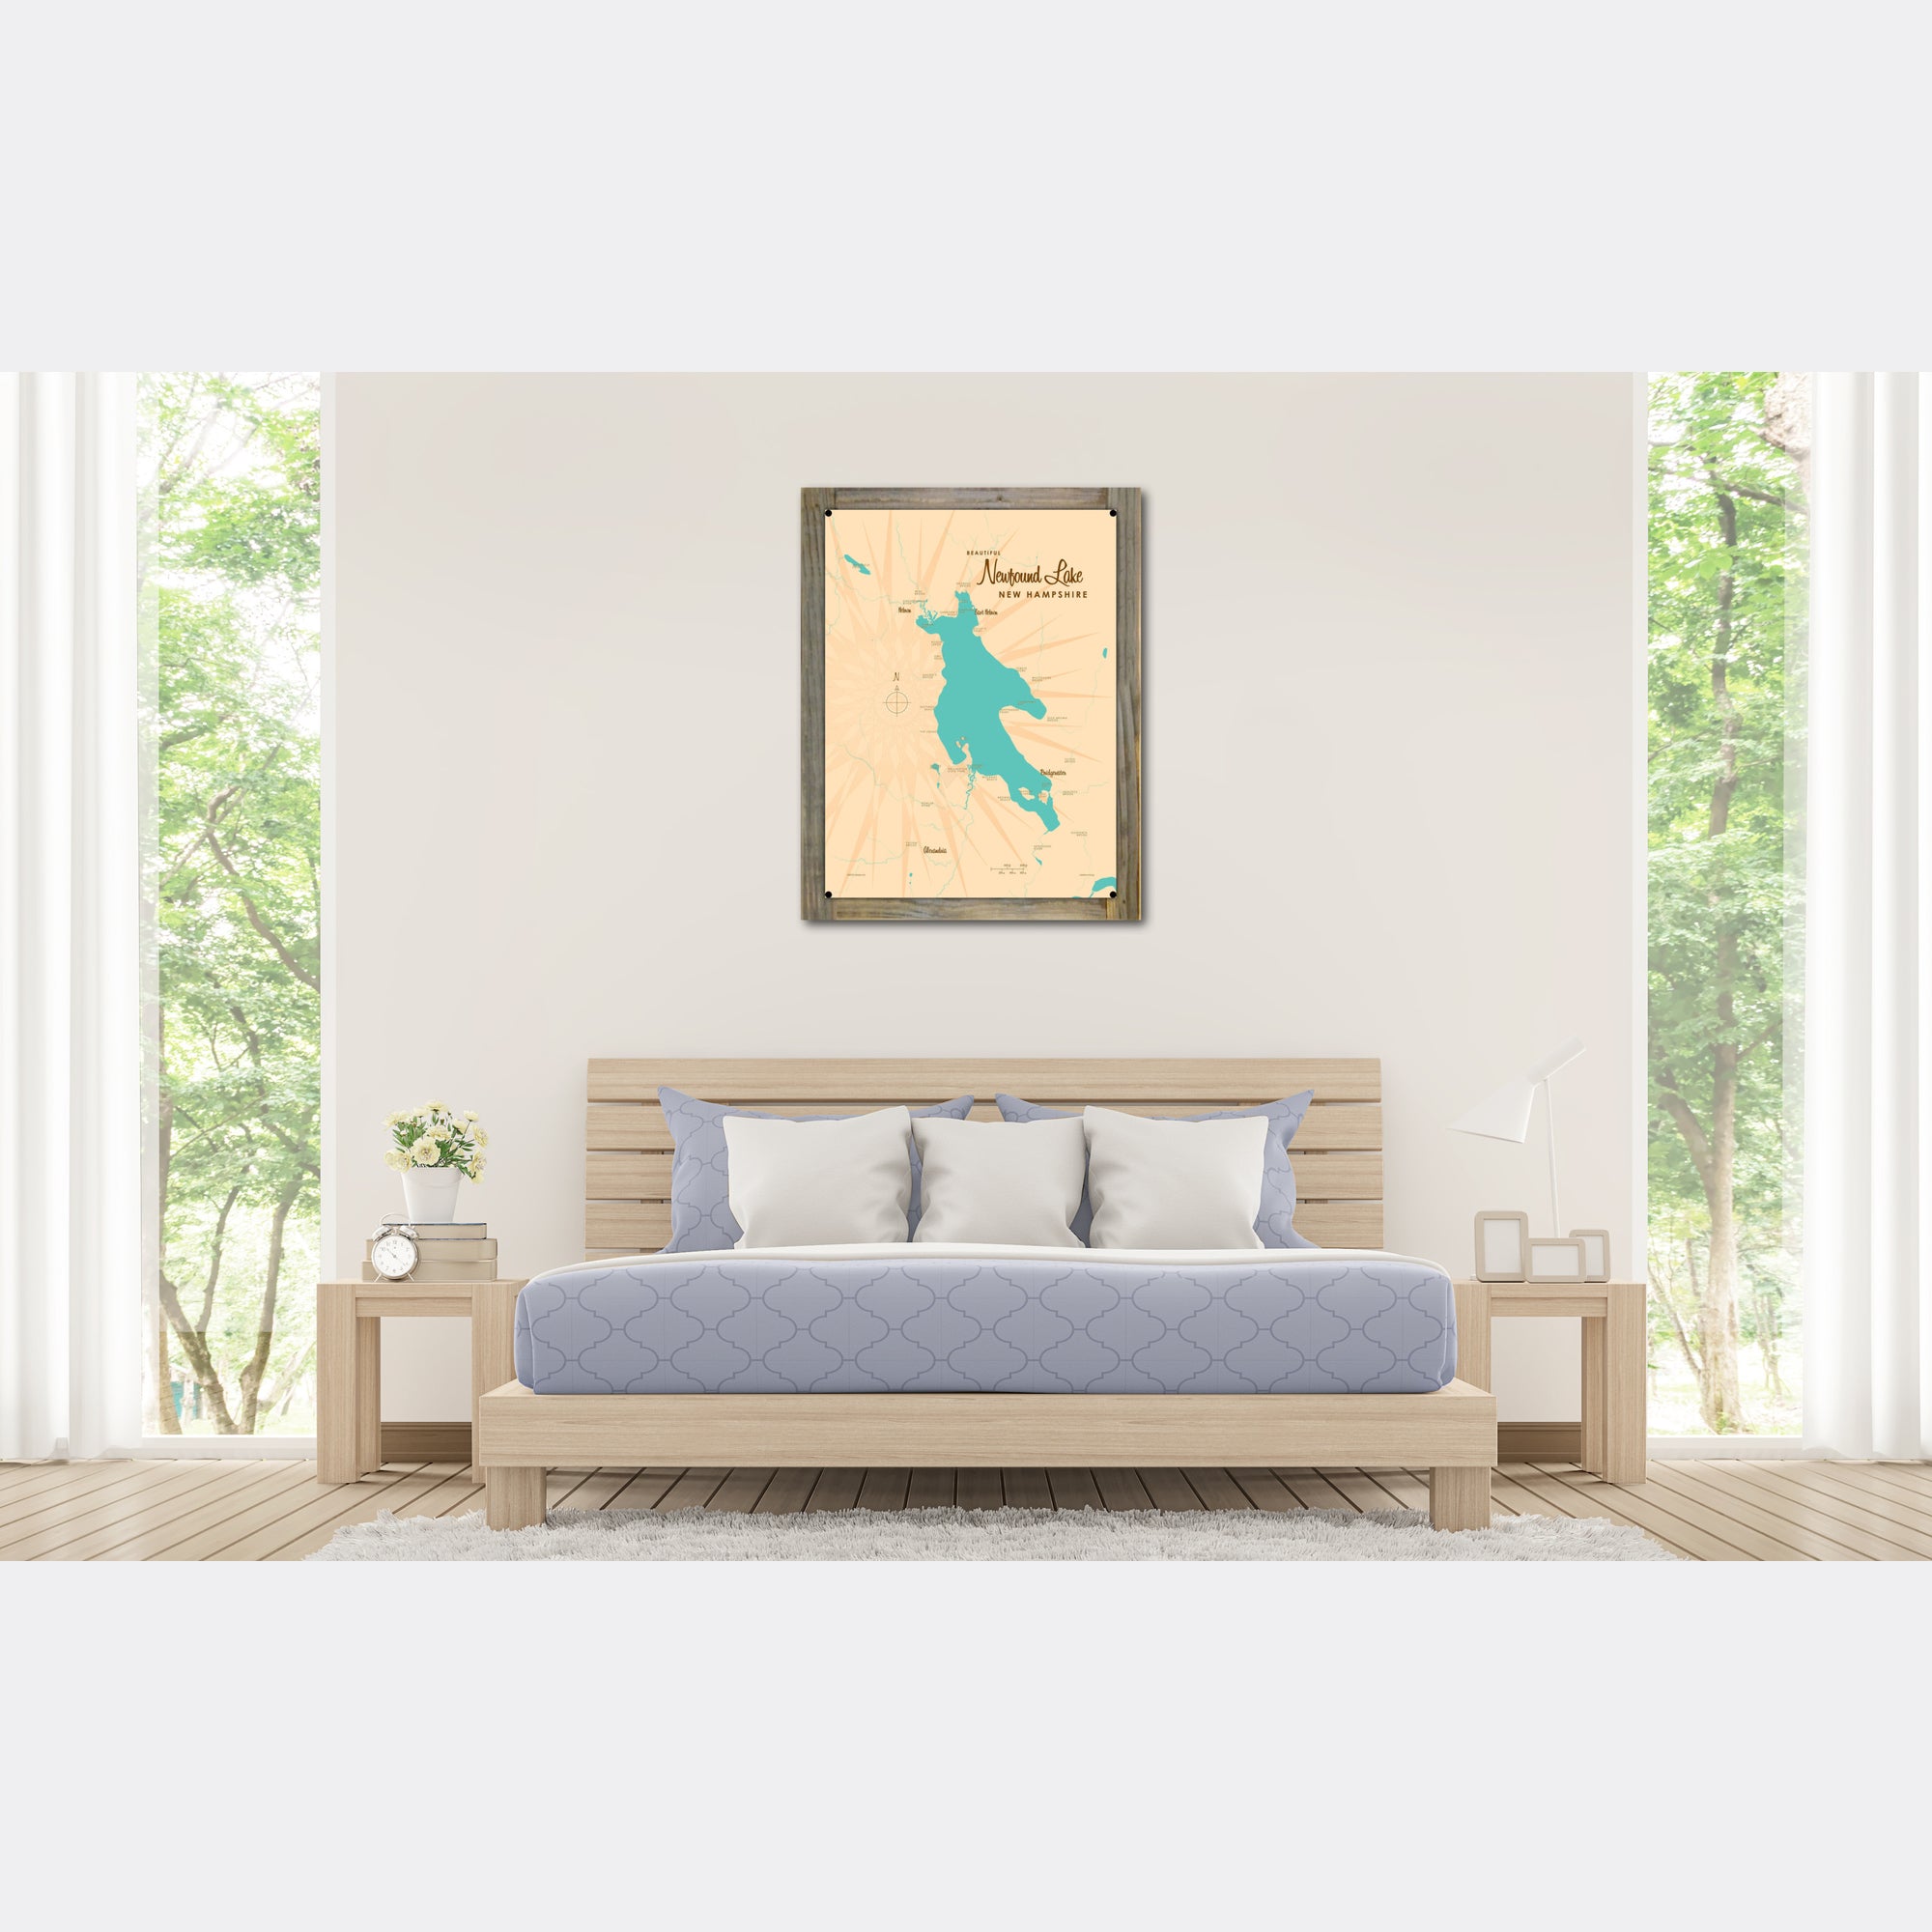 Newfound Lake New Hampshire, Wood-Mounted Metal Sign Map Art